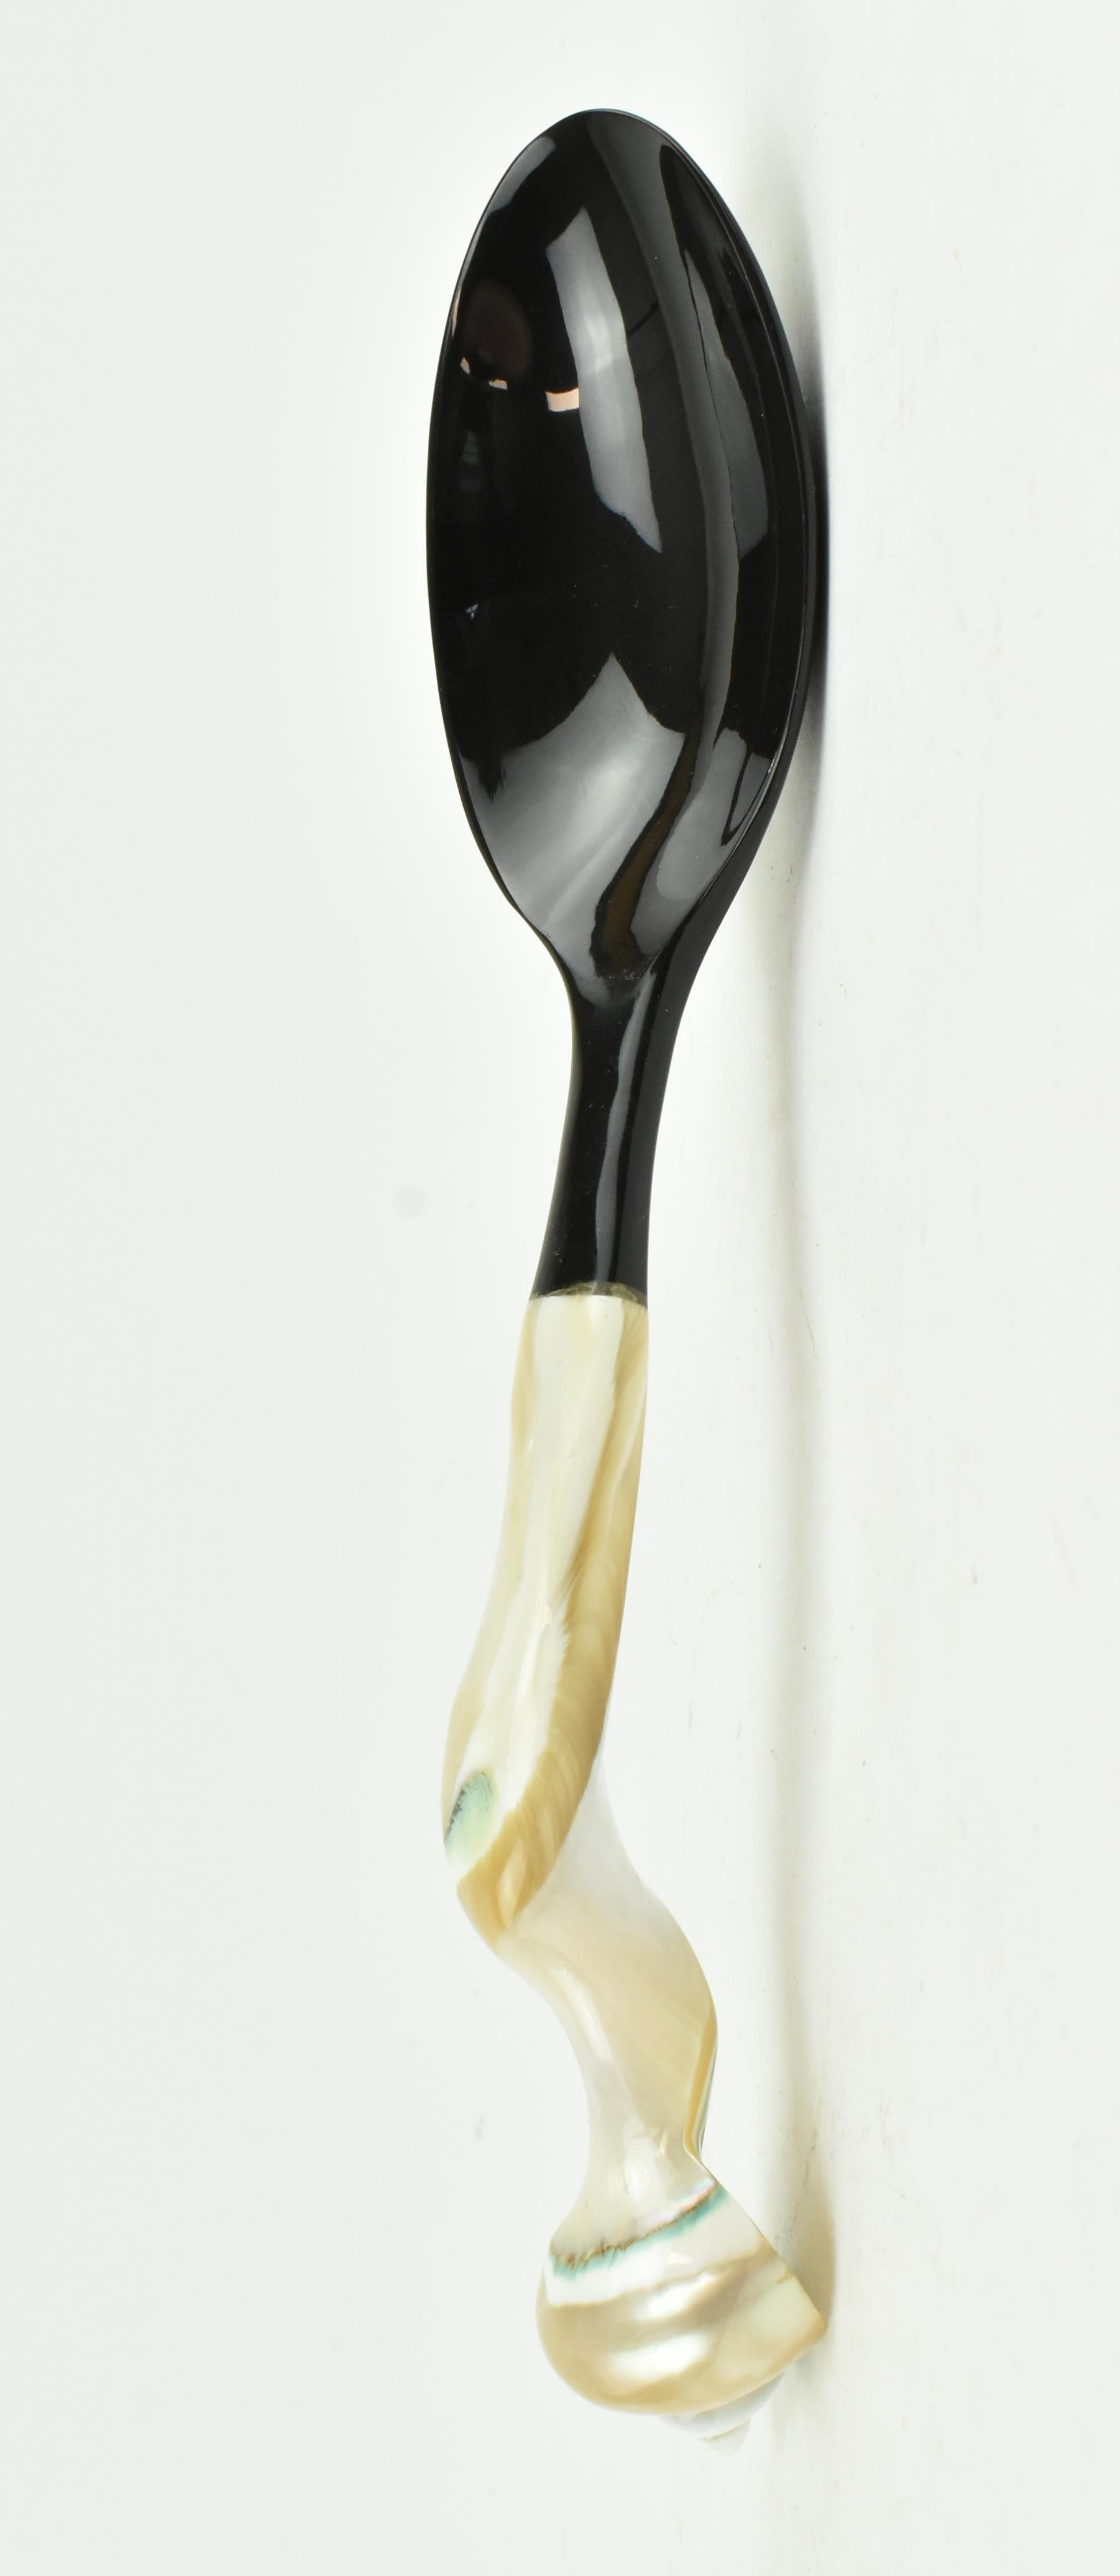 PAIR OF MOTHER OF PEARL CONCH HANDLED SALAD SPOONS & 1 OTHER - Image 7 of 8